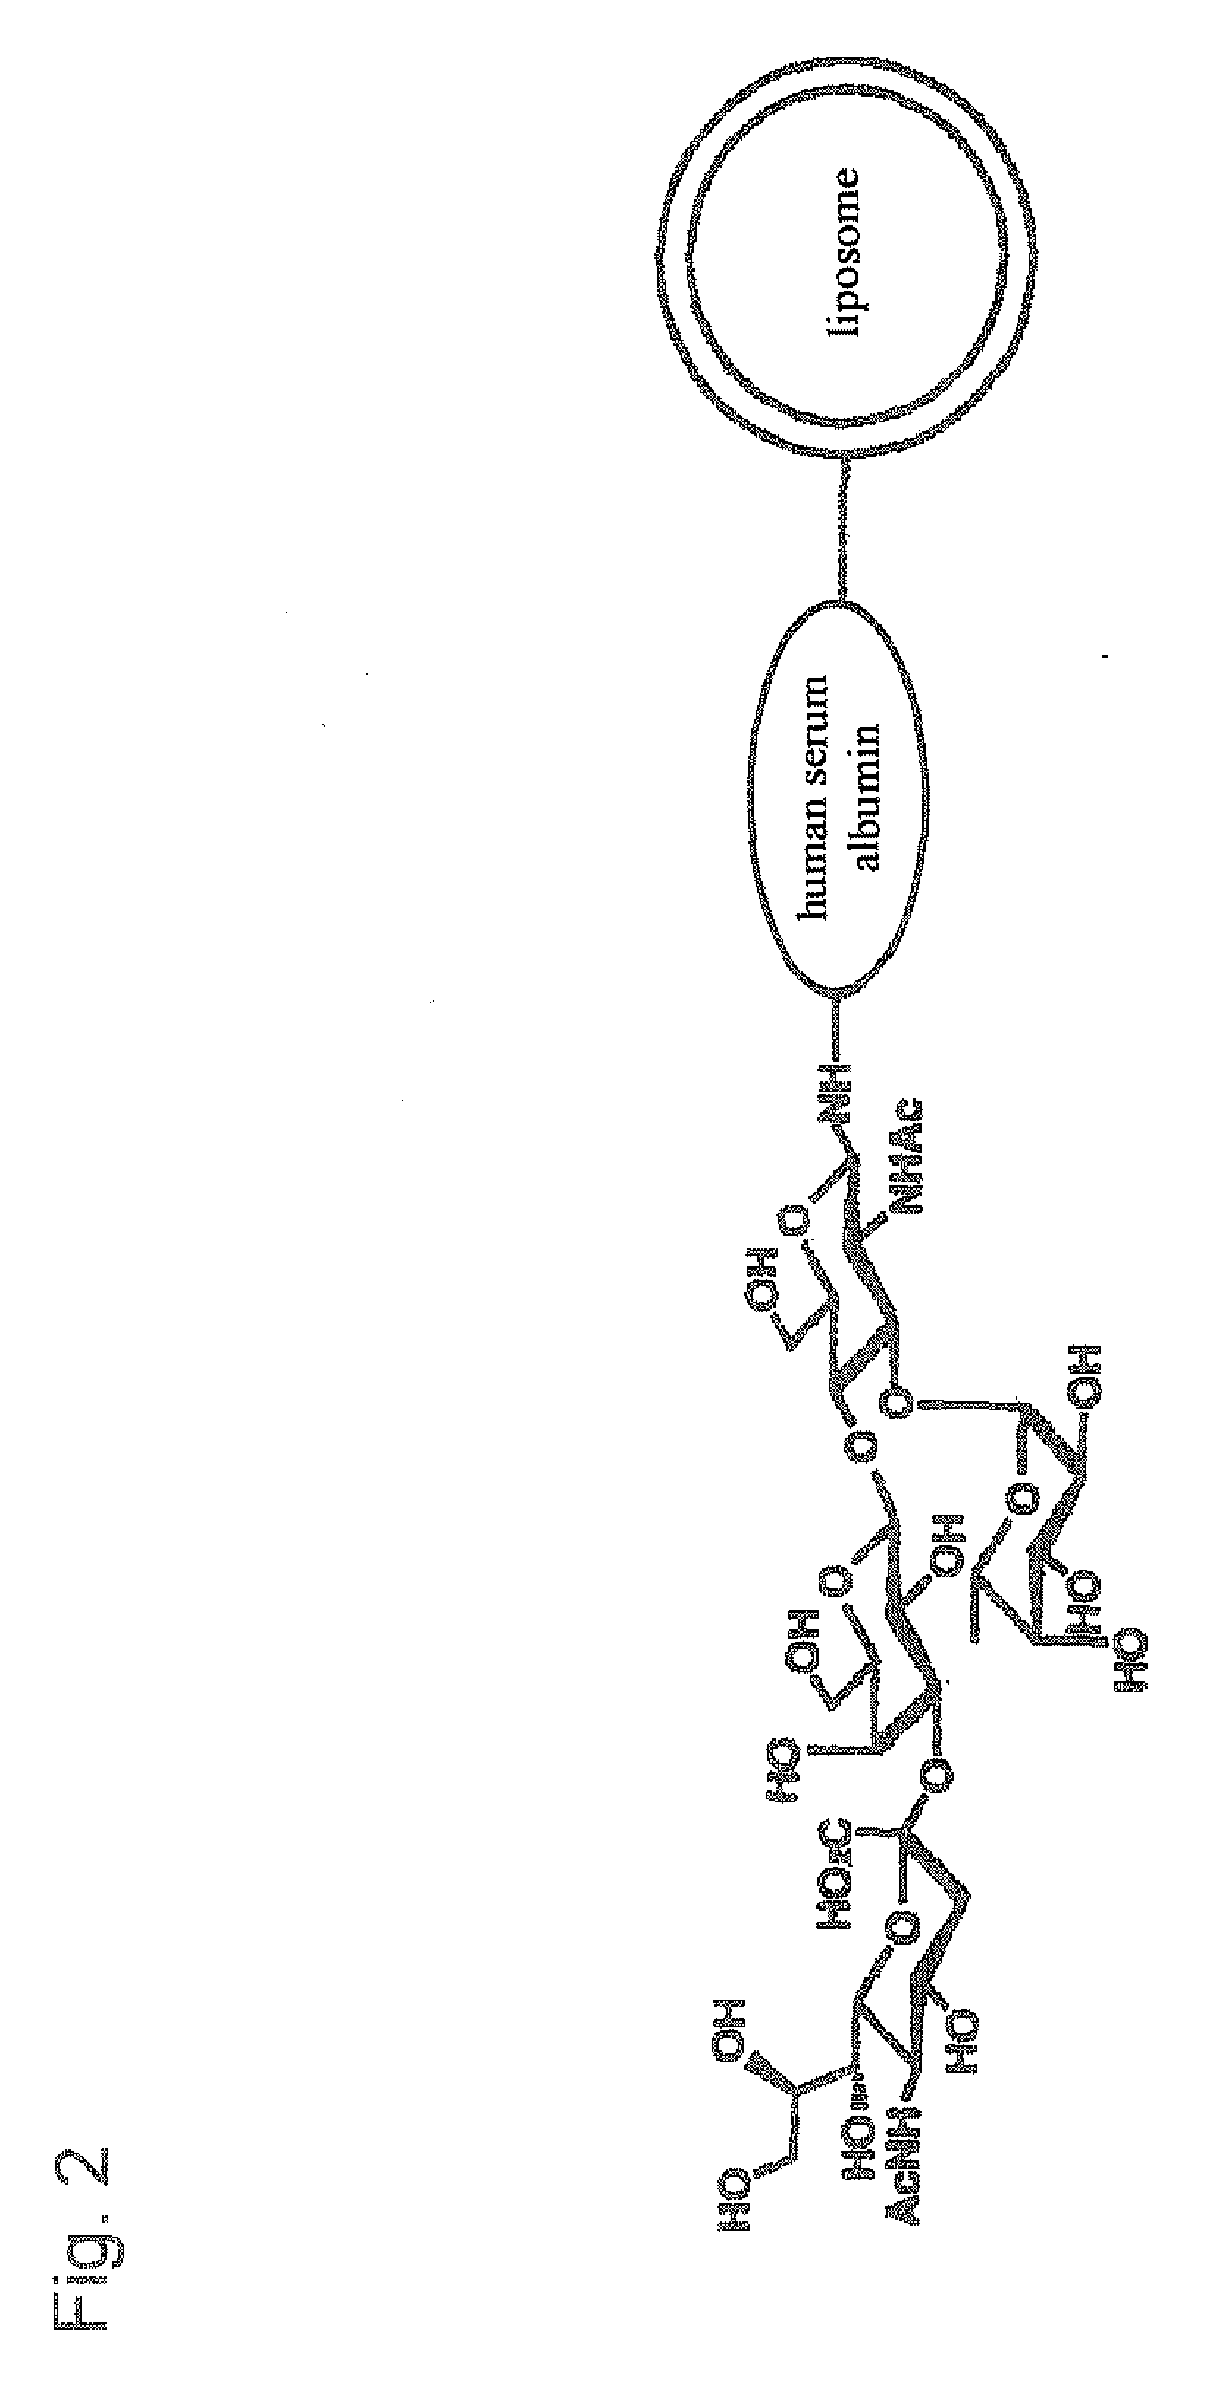 Therapeutic or Diagnostic Drug for Inflammatory Disease Comprising Targeting Liposome